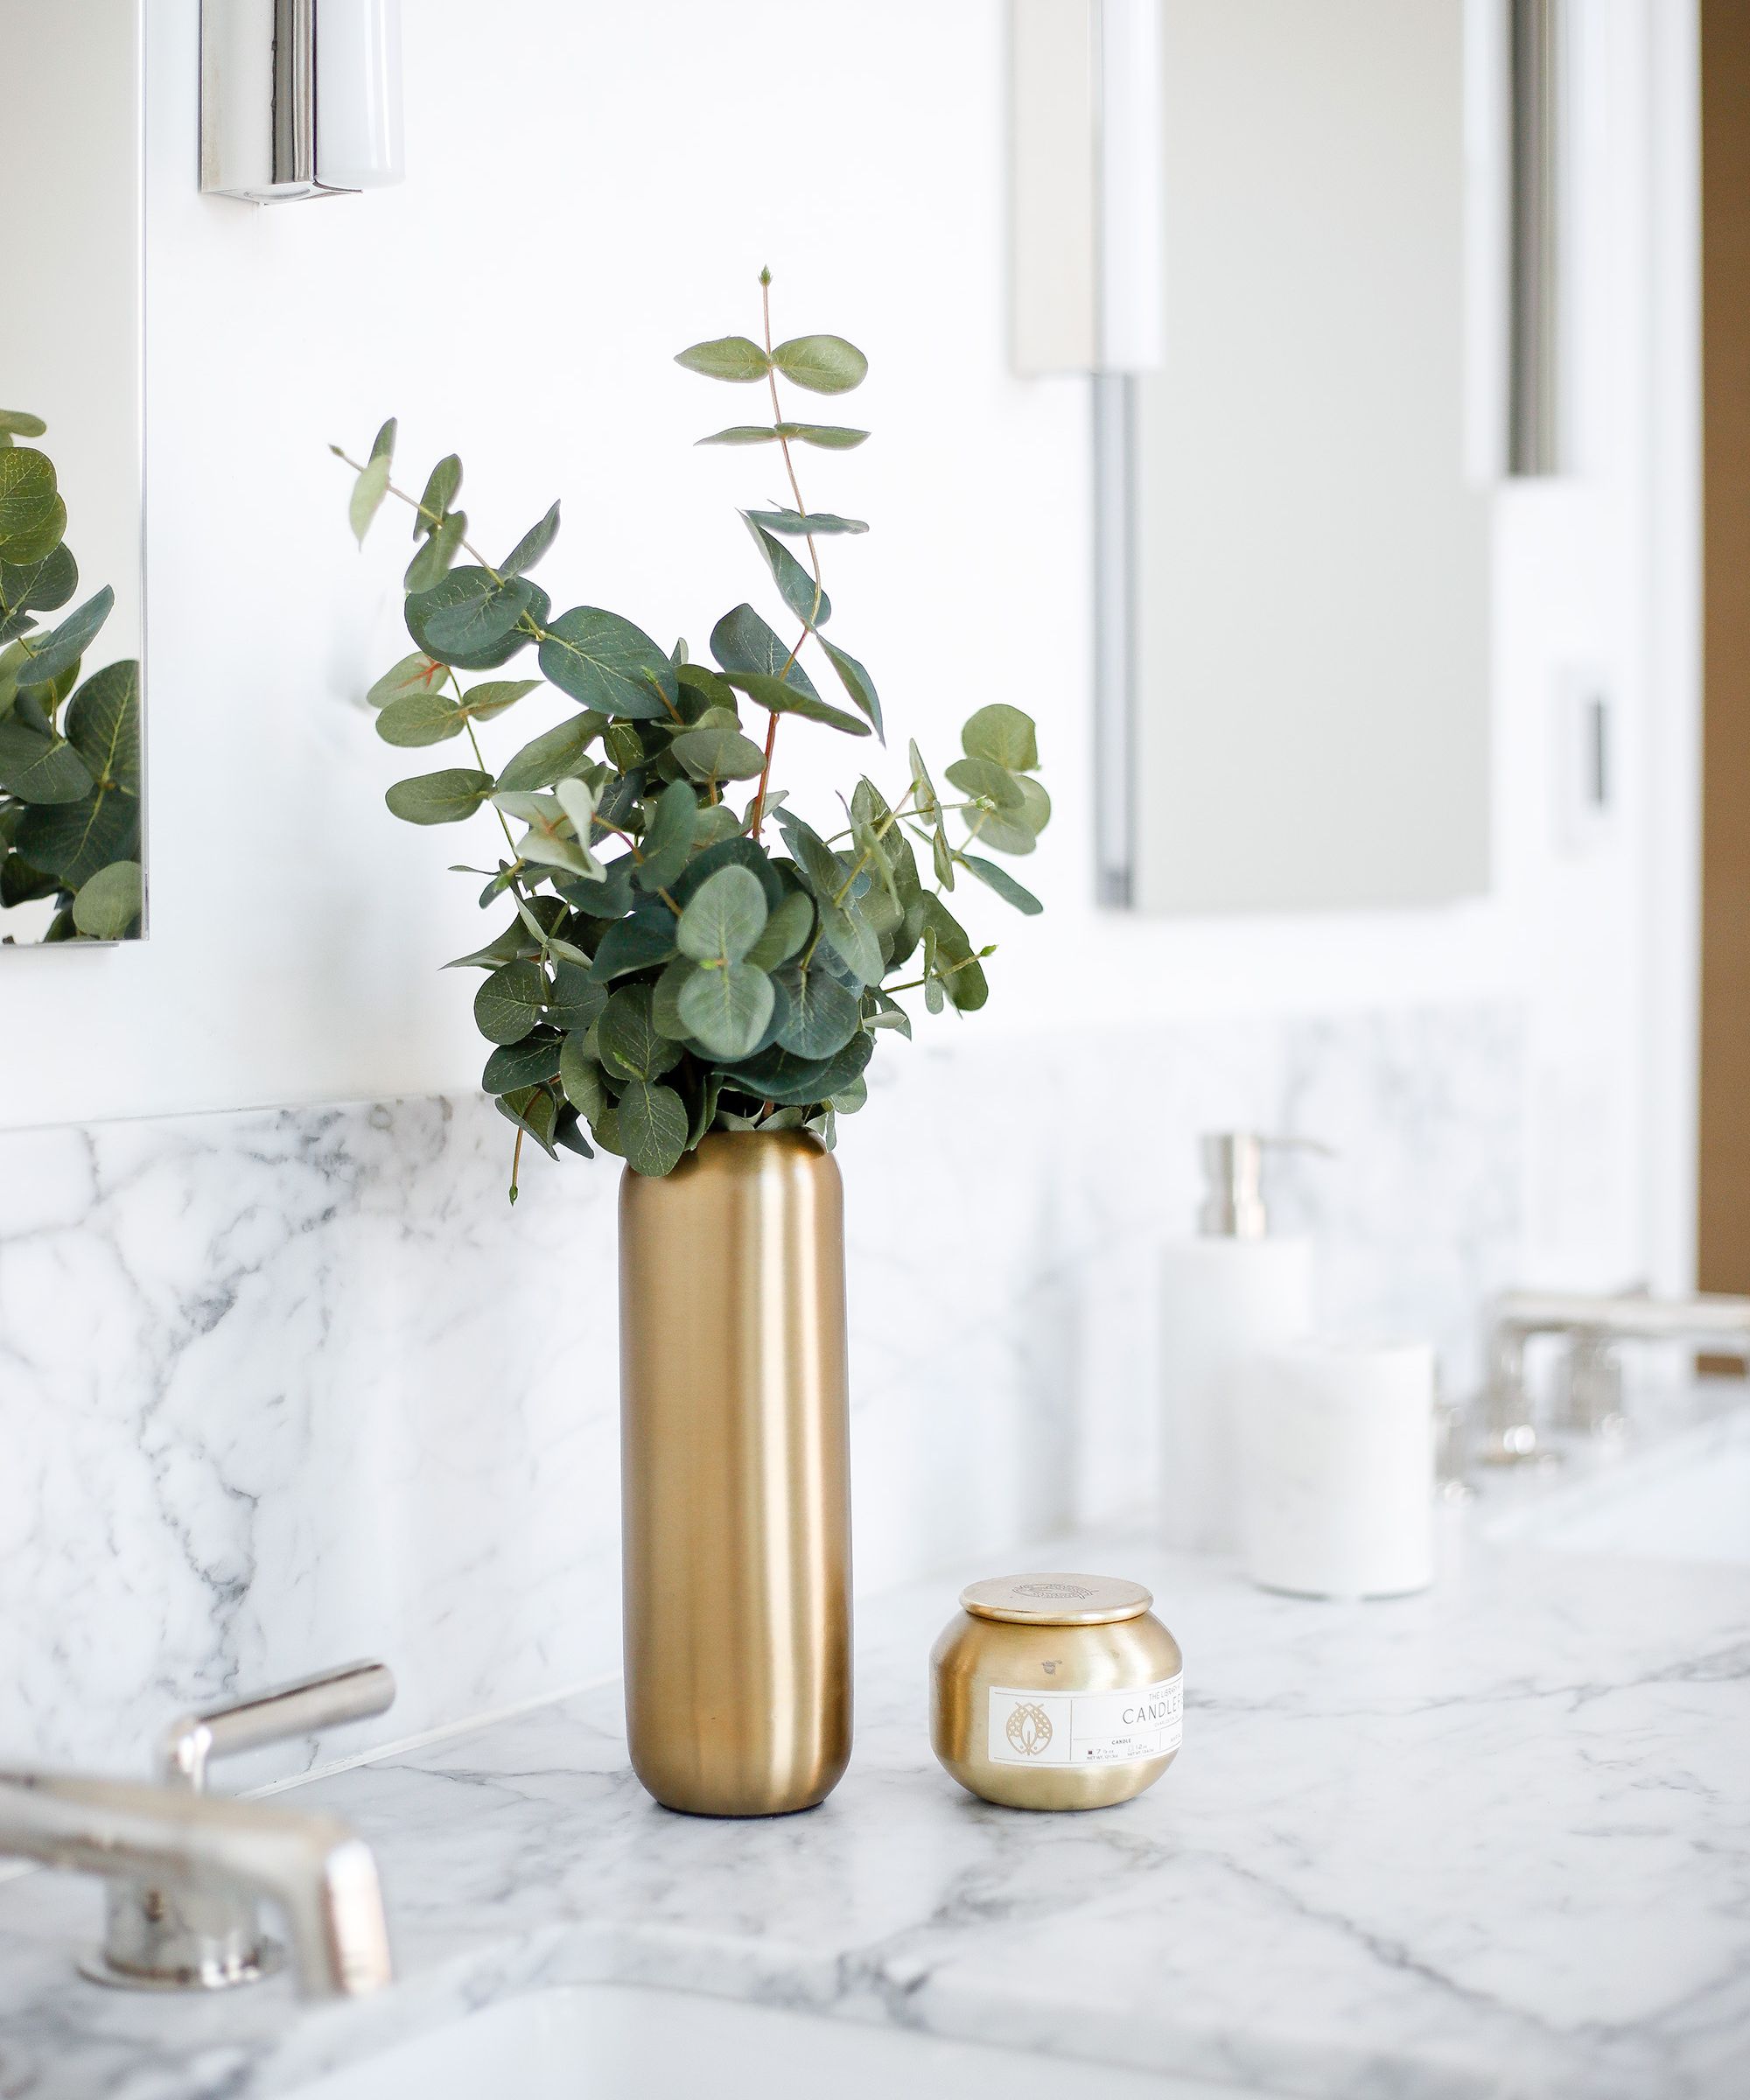 amazon, small bathroom upgrades — 5 stunning ideas that will make your space shine